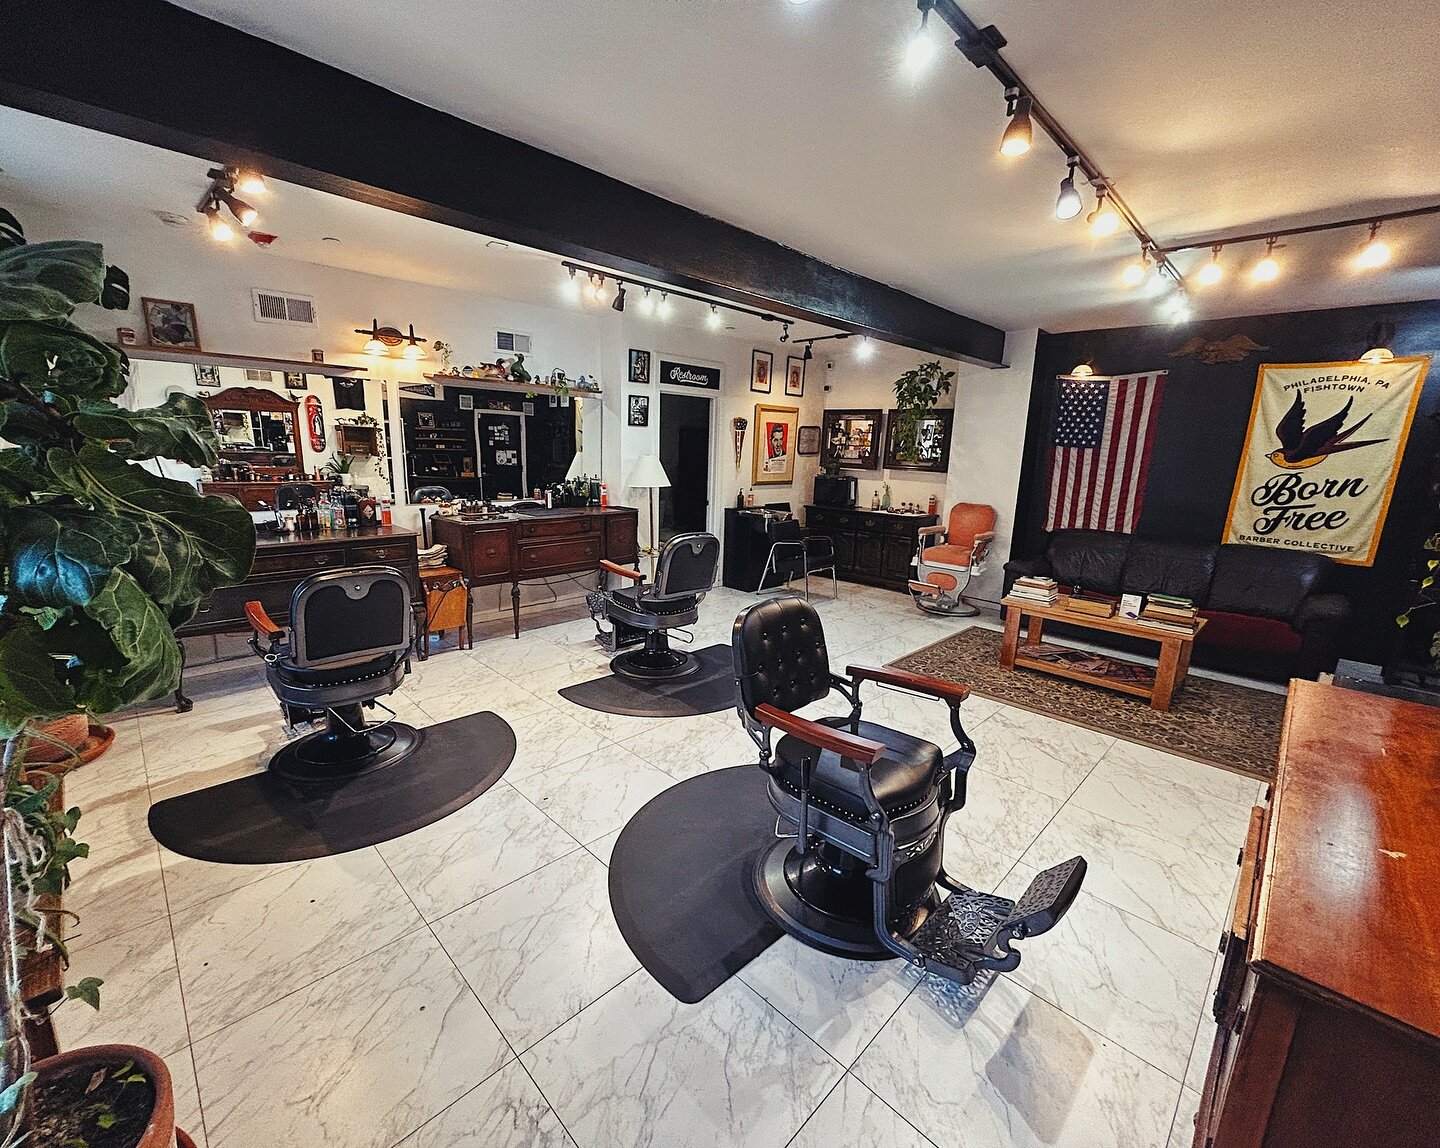 The shop is going to be undergoing some fun changes in March! 👀 

#alwaysgrowing #philadelphia #barbershop #barbershopsofamerica #philly #phillybarbershops #phillybarber #fishtown #barber #traditionalbarber #traditional